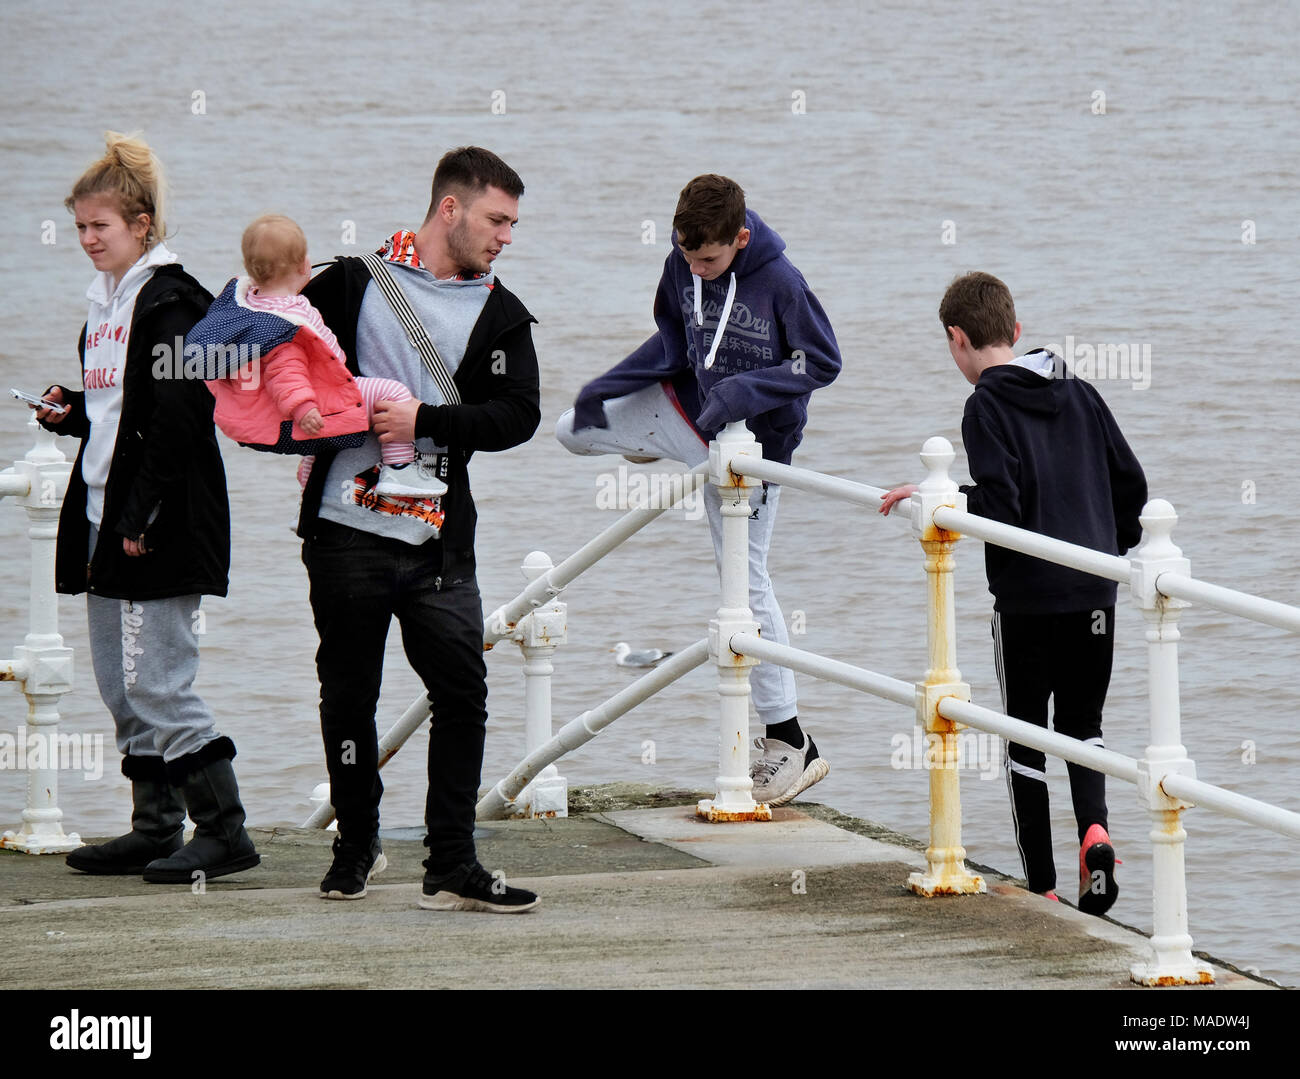 Family group with two youths in danger on wrong side of sea wall railings. Stock Photo